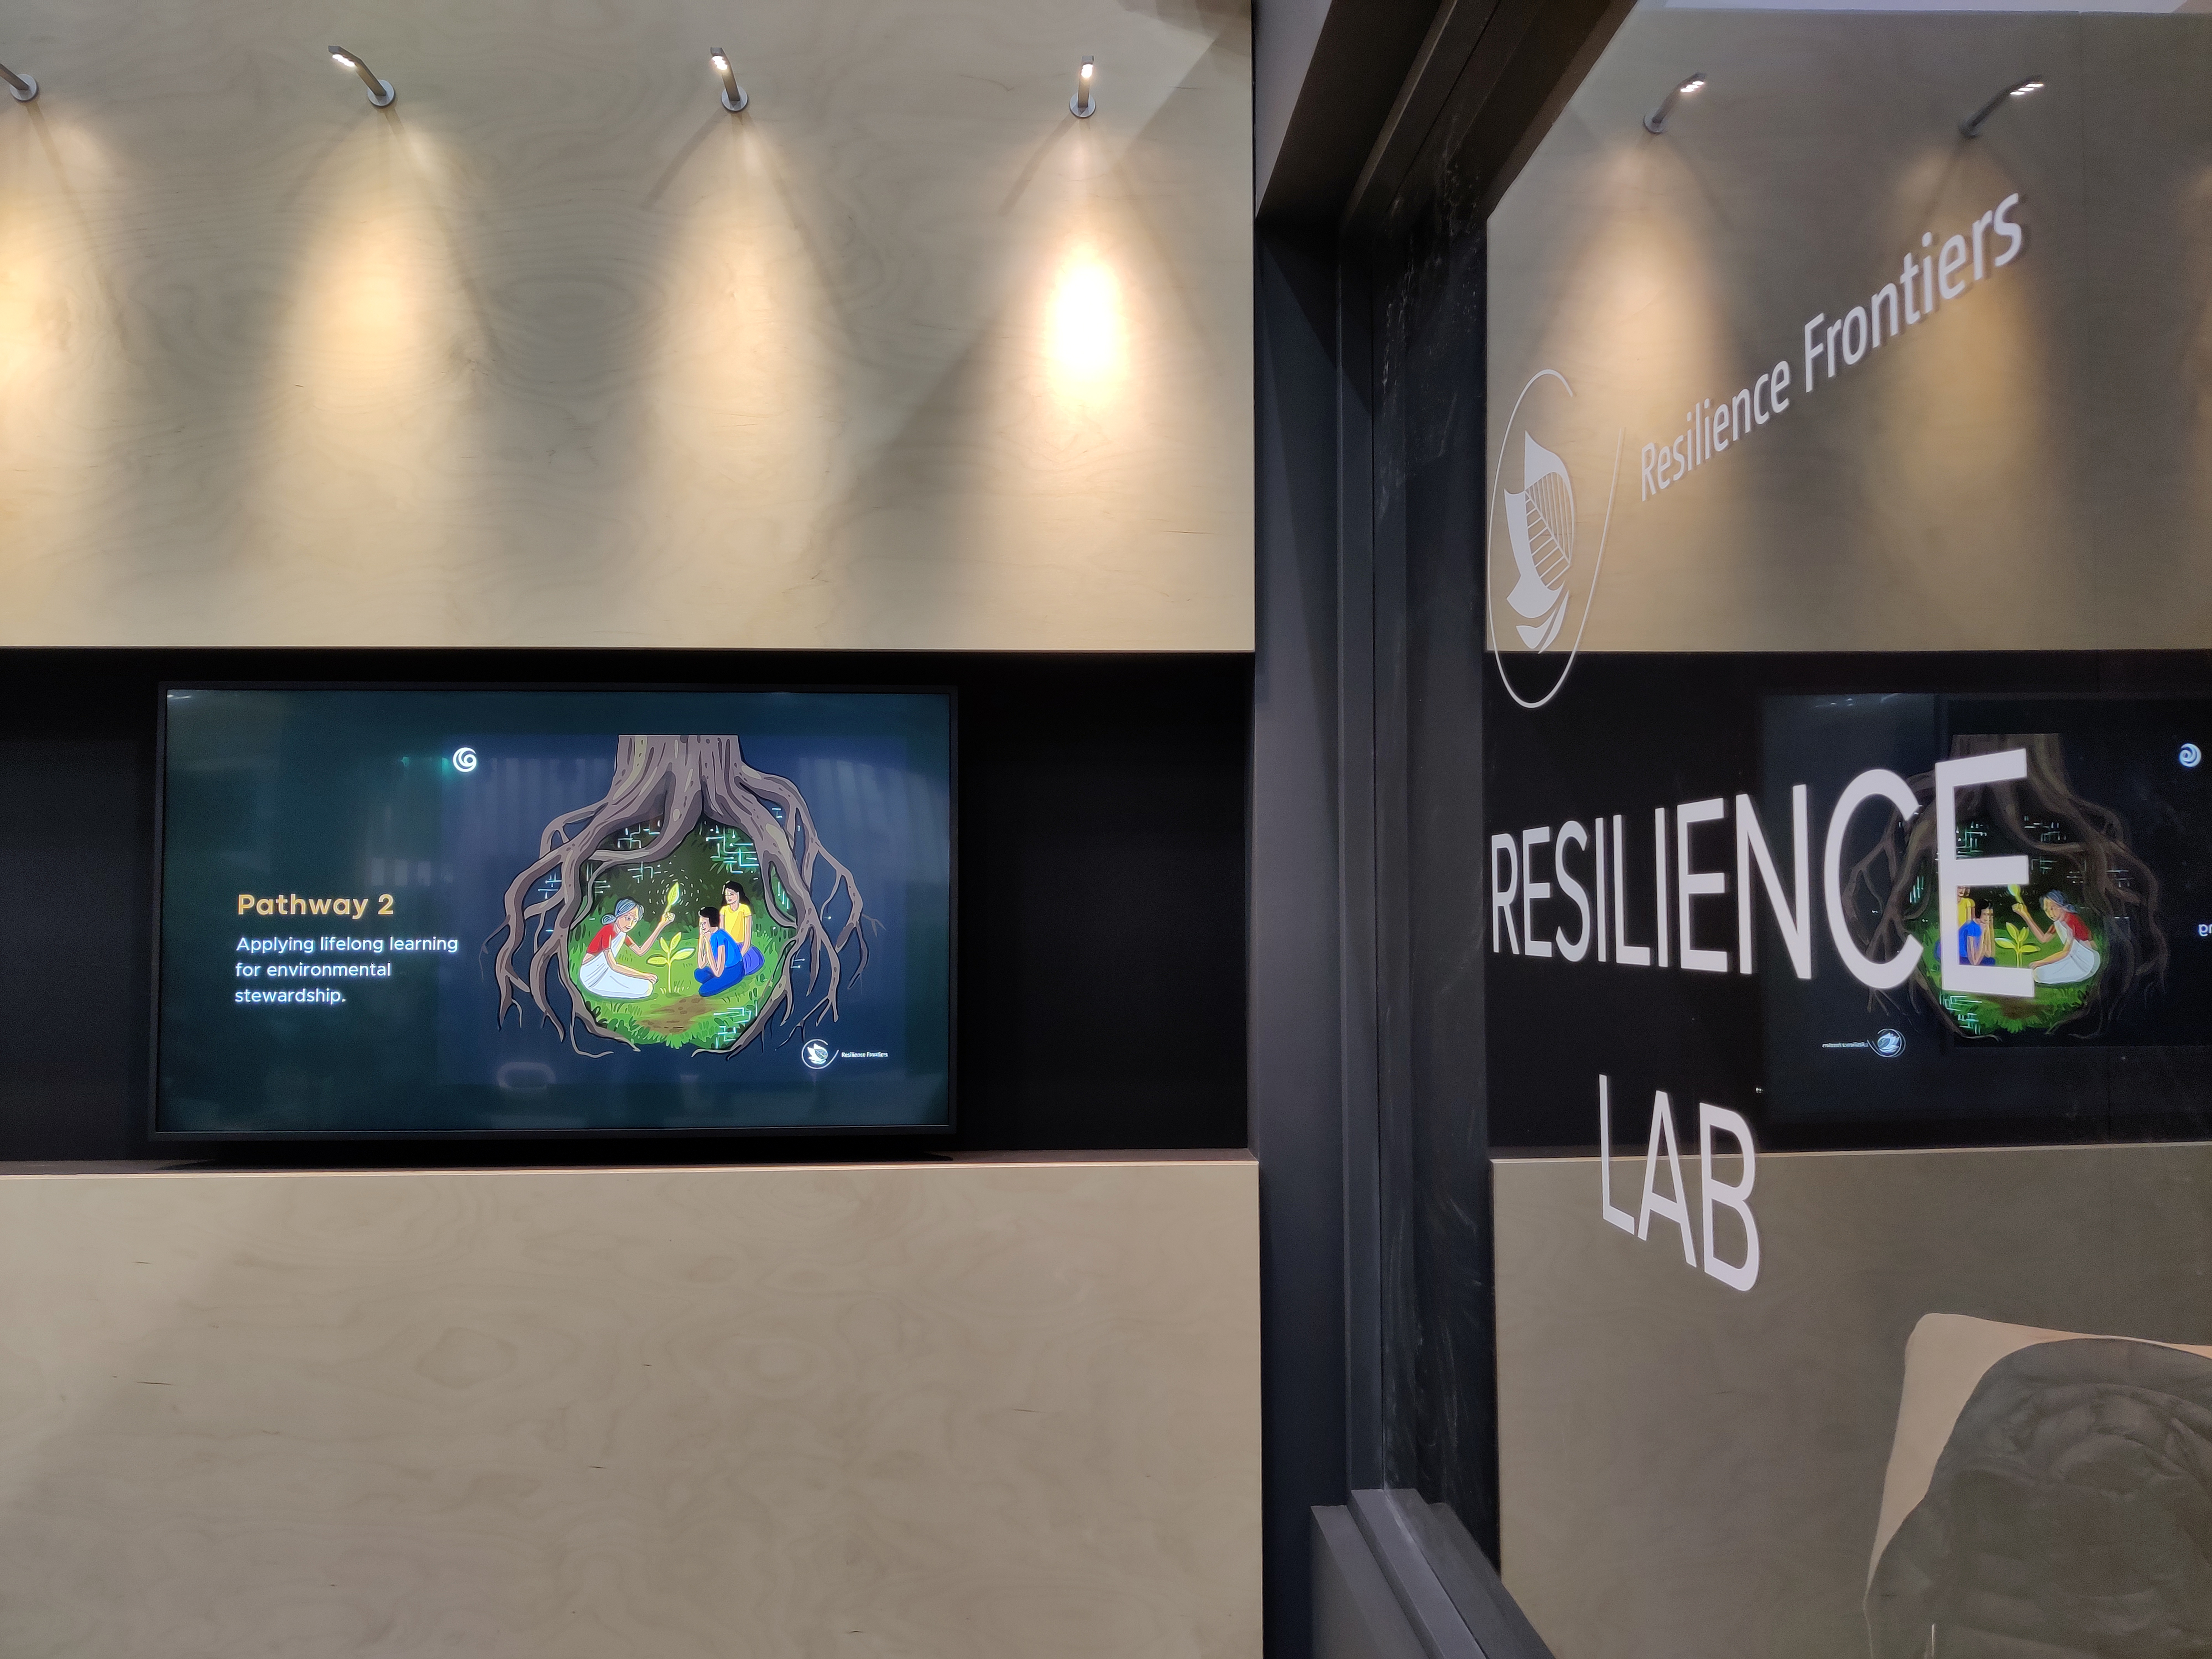 Highlights from the Resilience Lab